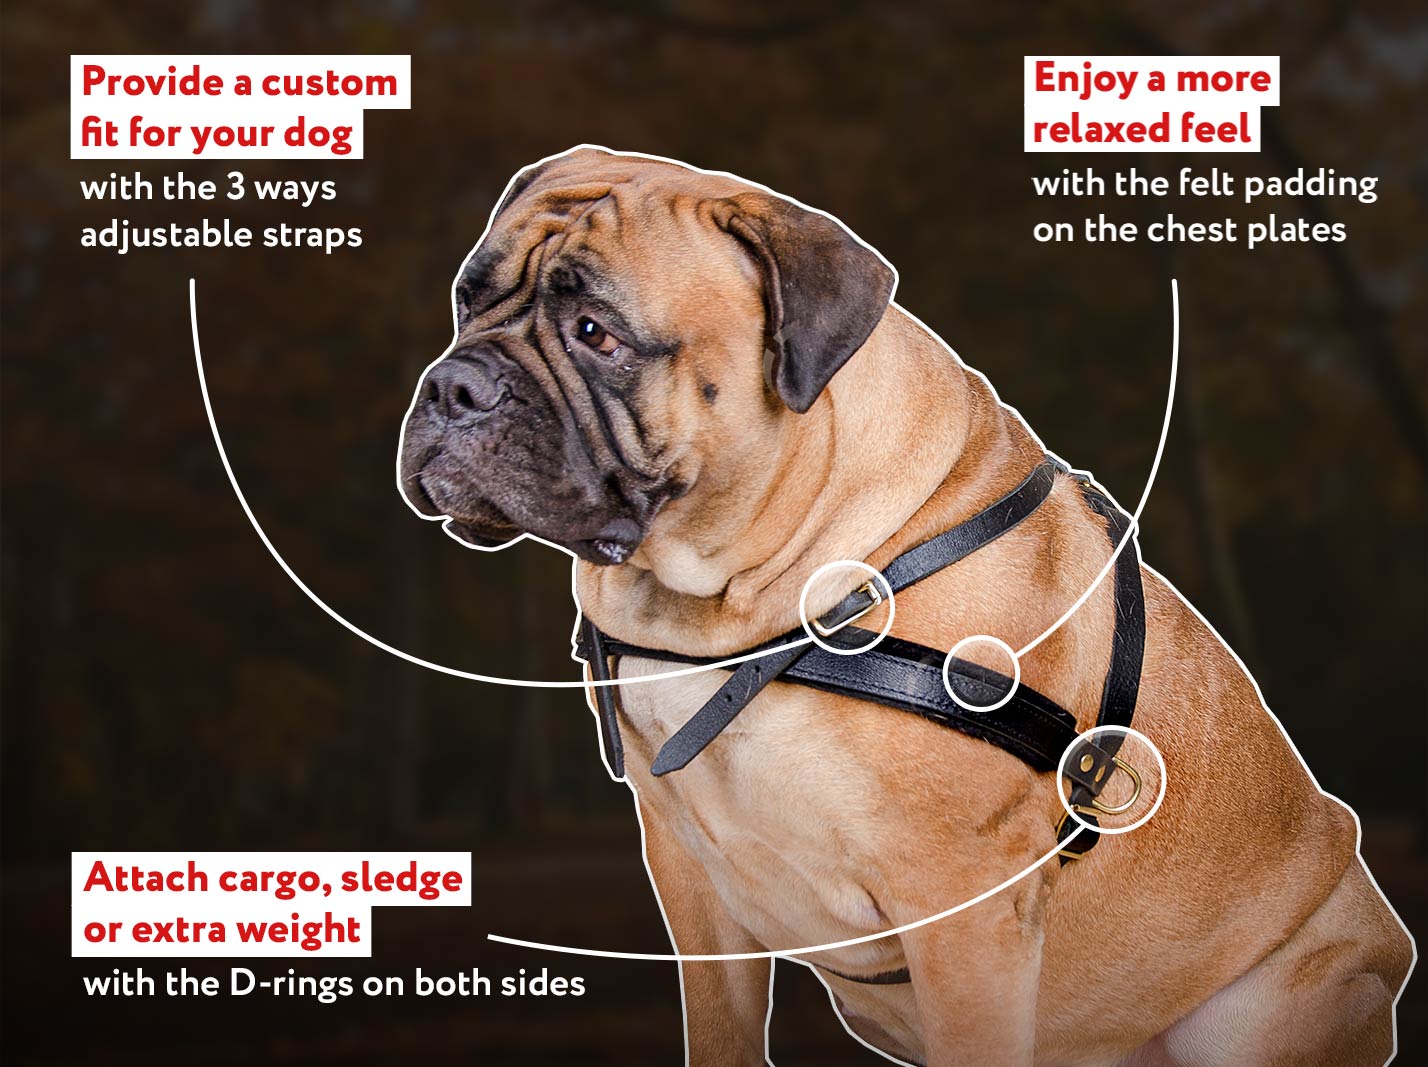 Walking Luxury Handcrafted Leather Dog Harness [H7###1092 Leather Tracking Dog  Harness] : Custom dog harnesses for Pulling, Training, Tracking, Walking